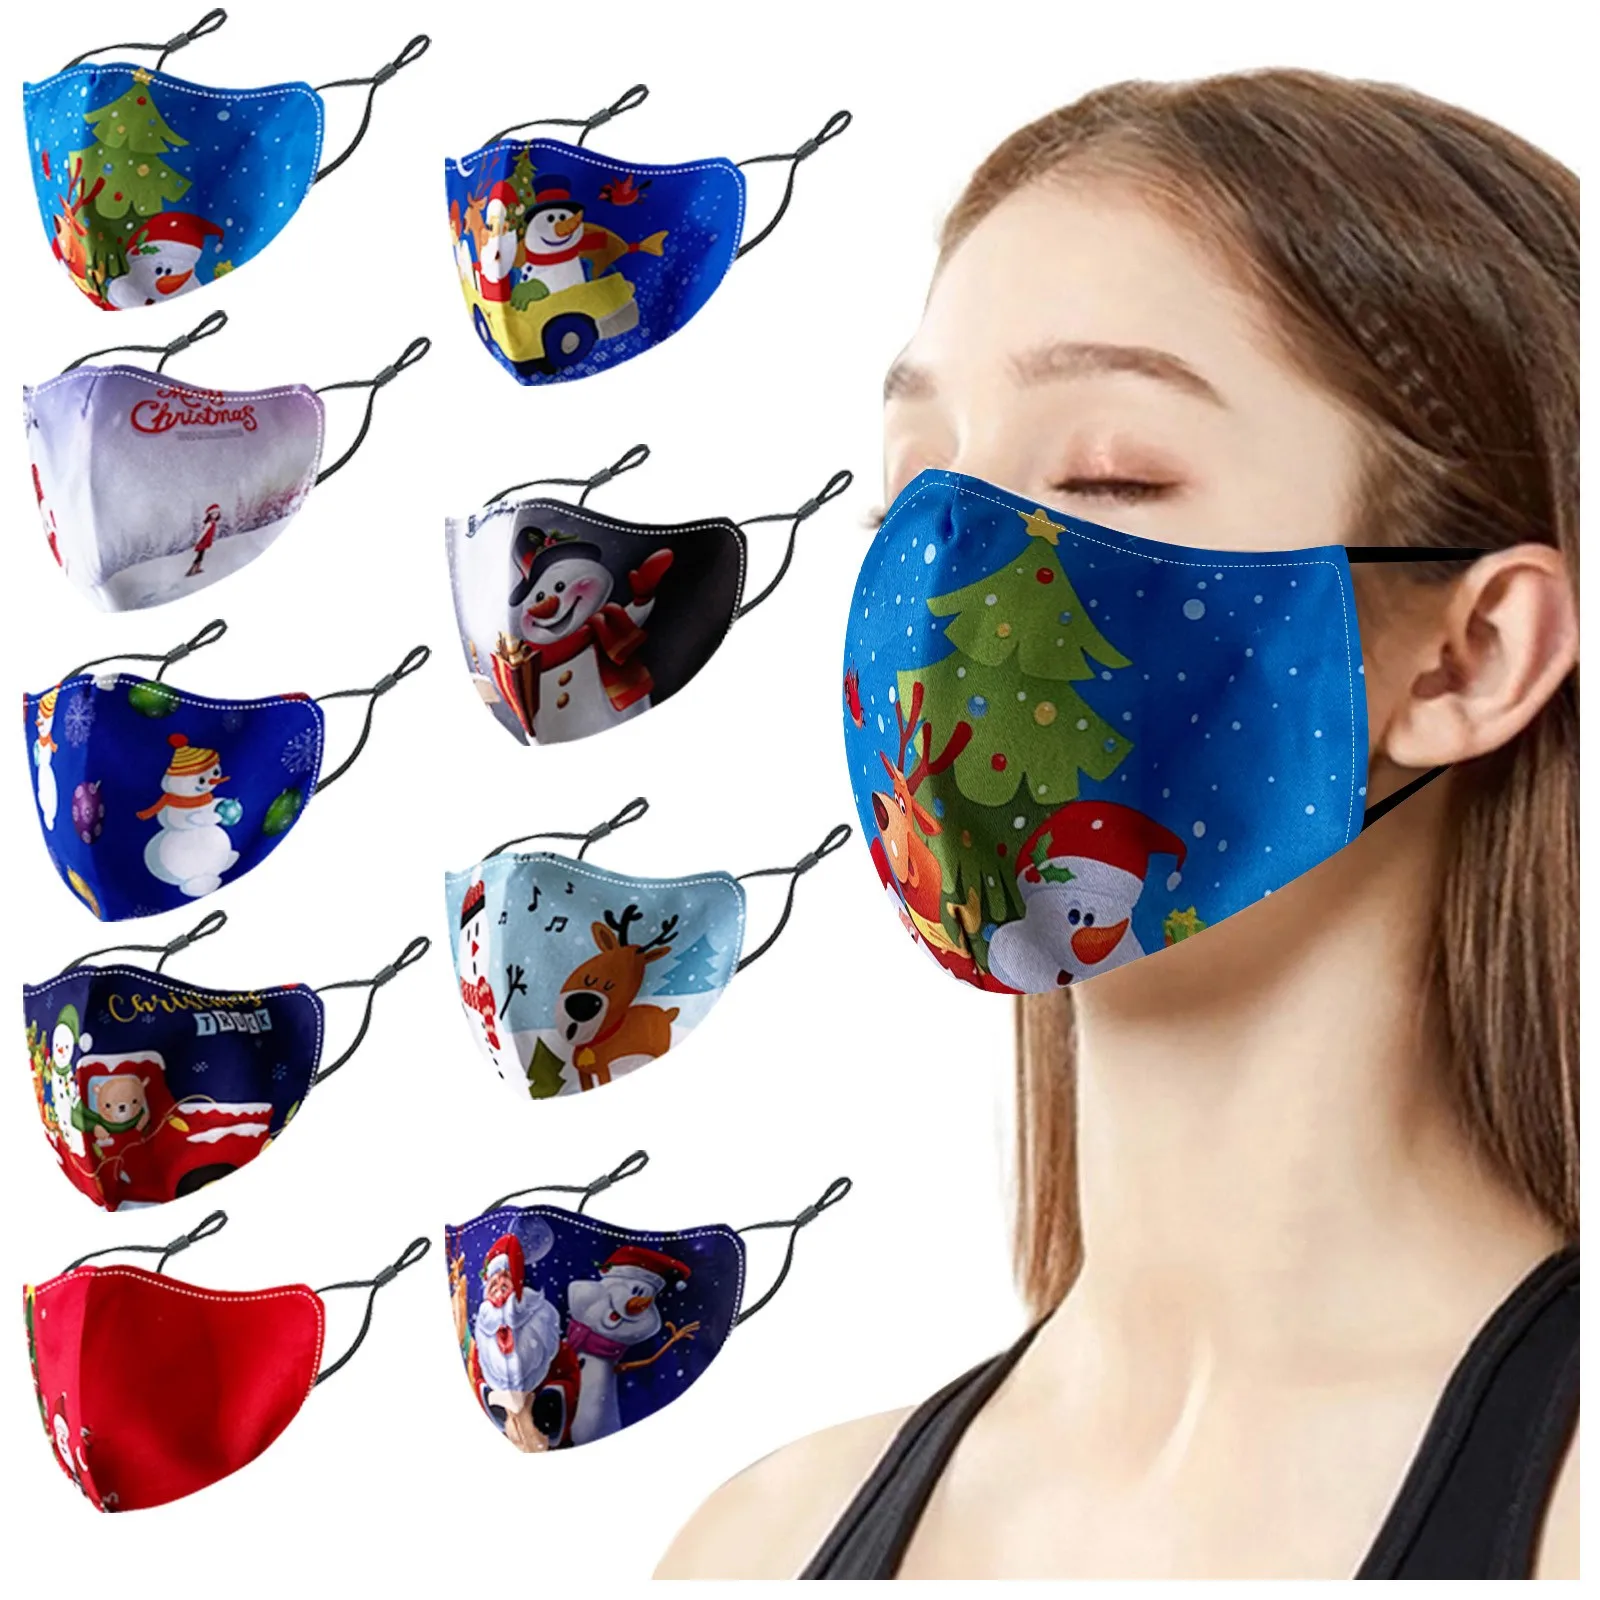 

1pc Christmas Cover Stretchy Mask Reusable Washable Safety maske PM2.5 dustproof Earloop Breathable маска на рот